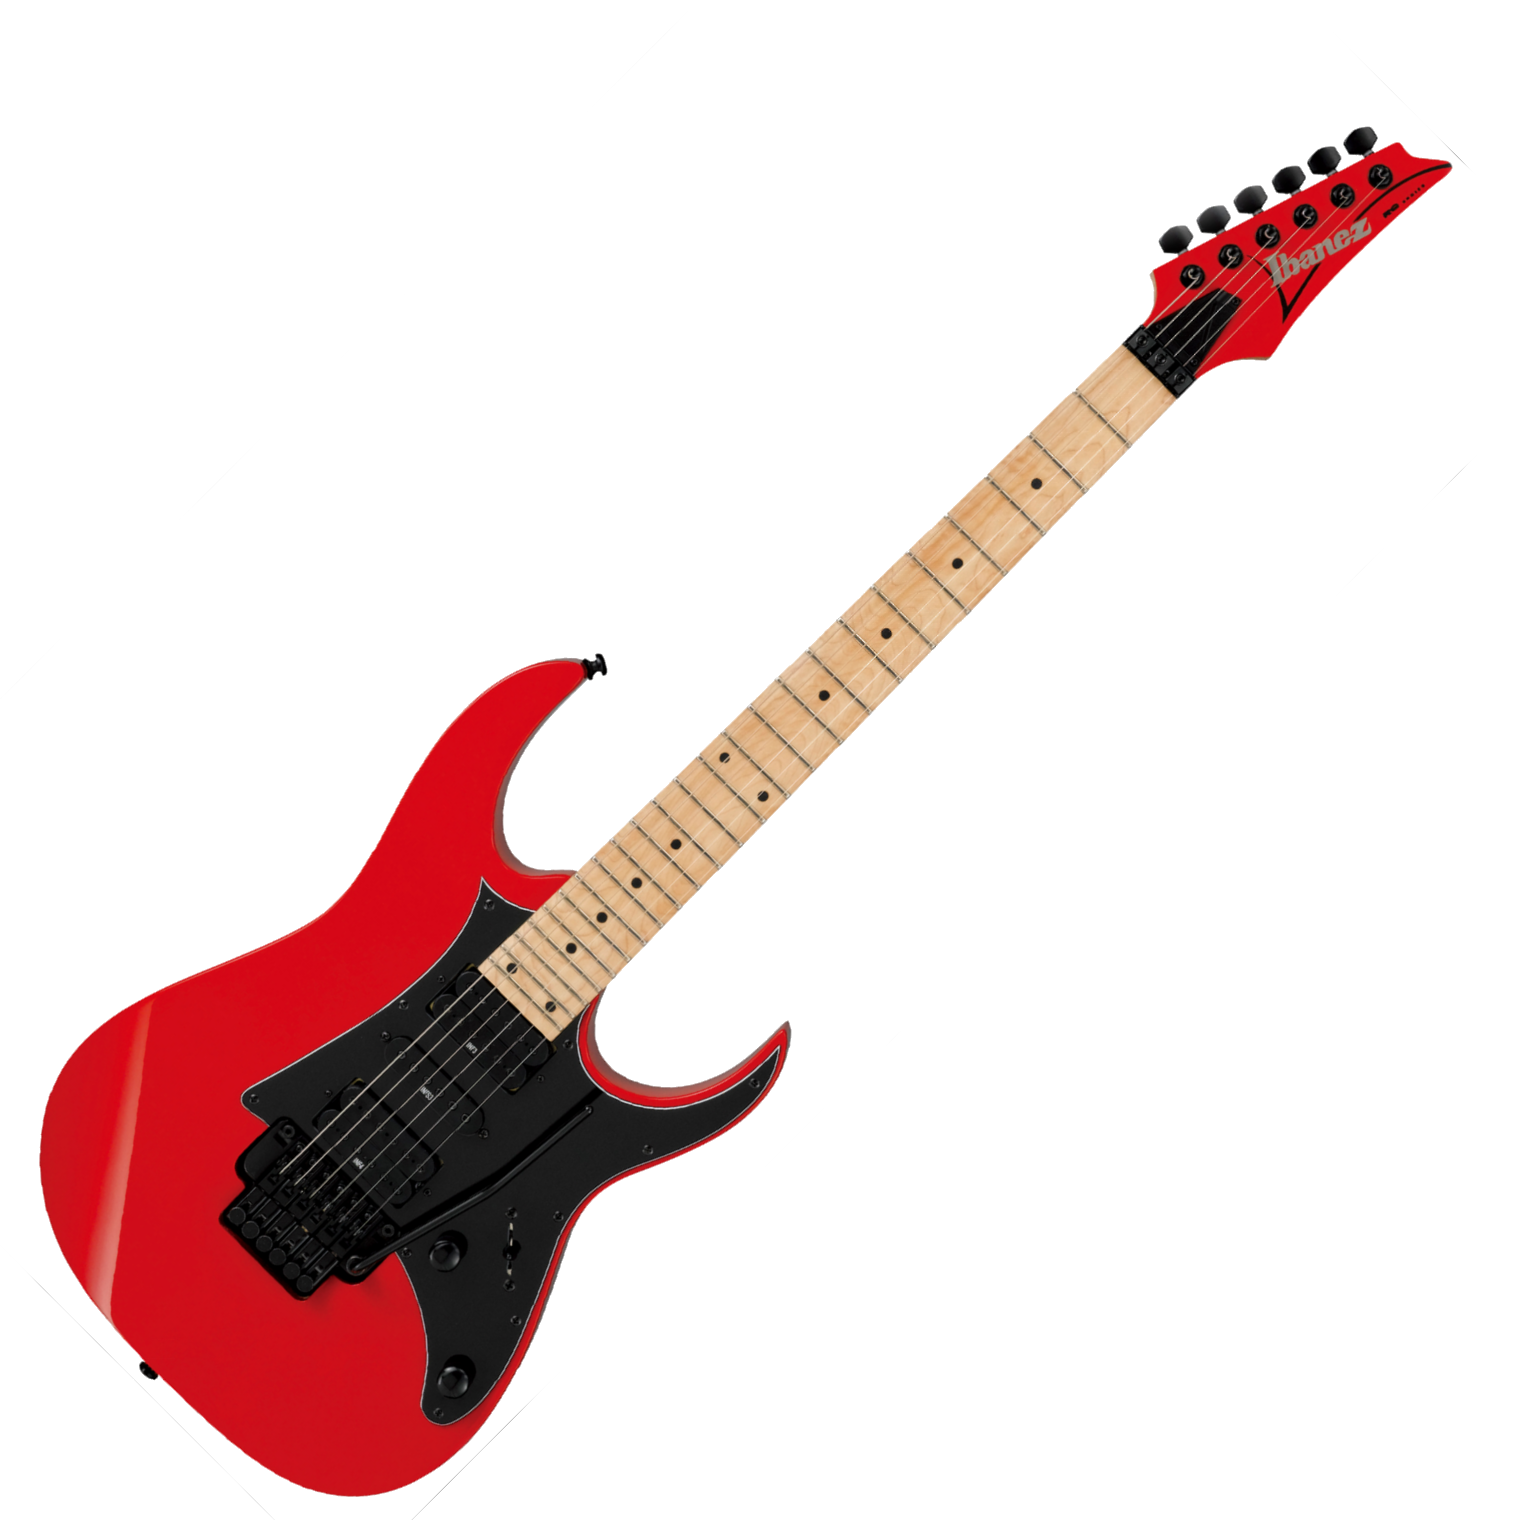 Red Black Ibanez RG Series Guitar Photo Picture HD Wallpaper